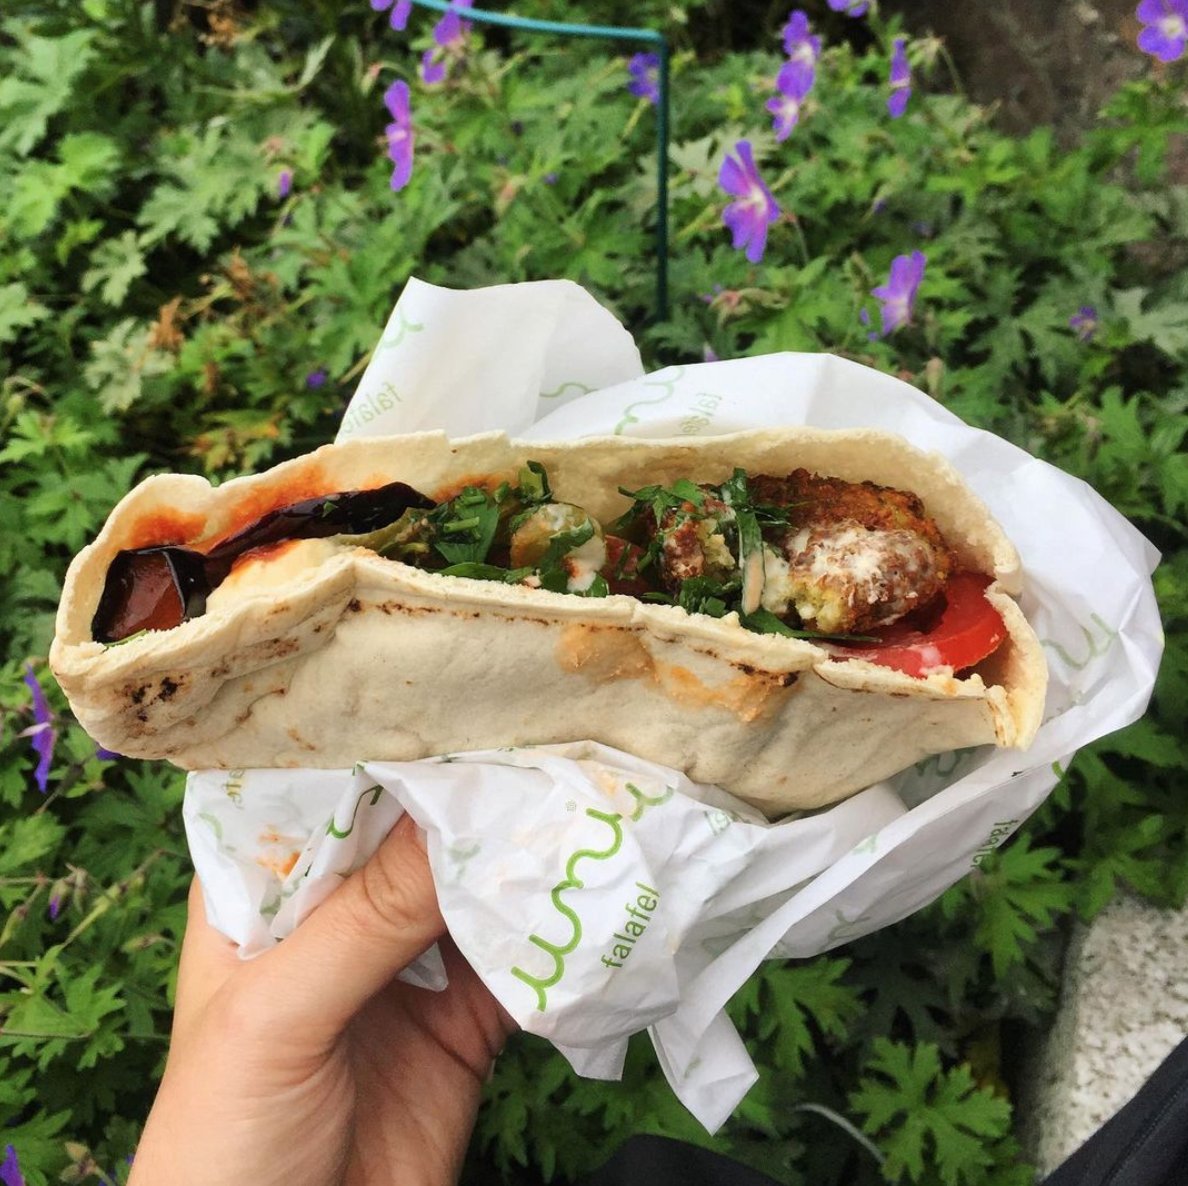 Thanks for sharing @veghuns1 📷
'Does anything beat an Umi falafel?'